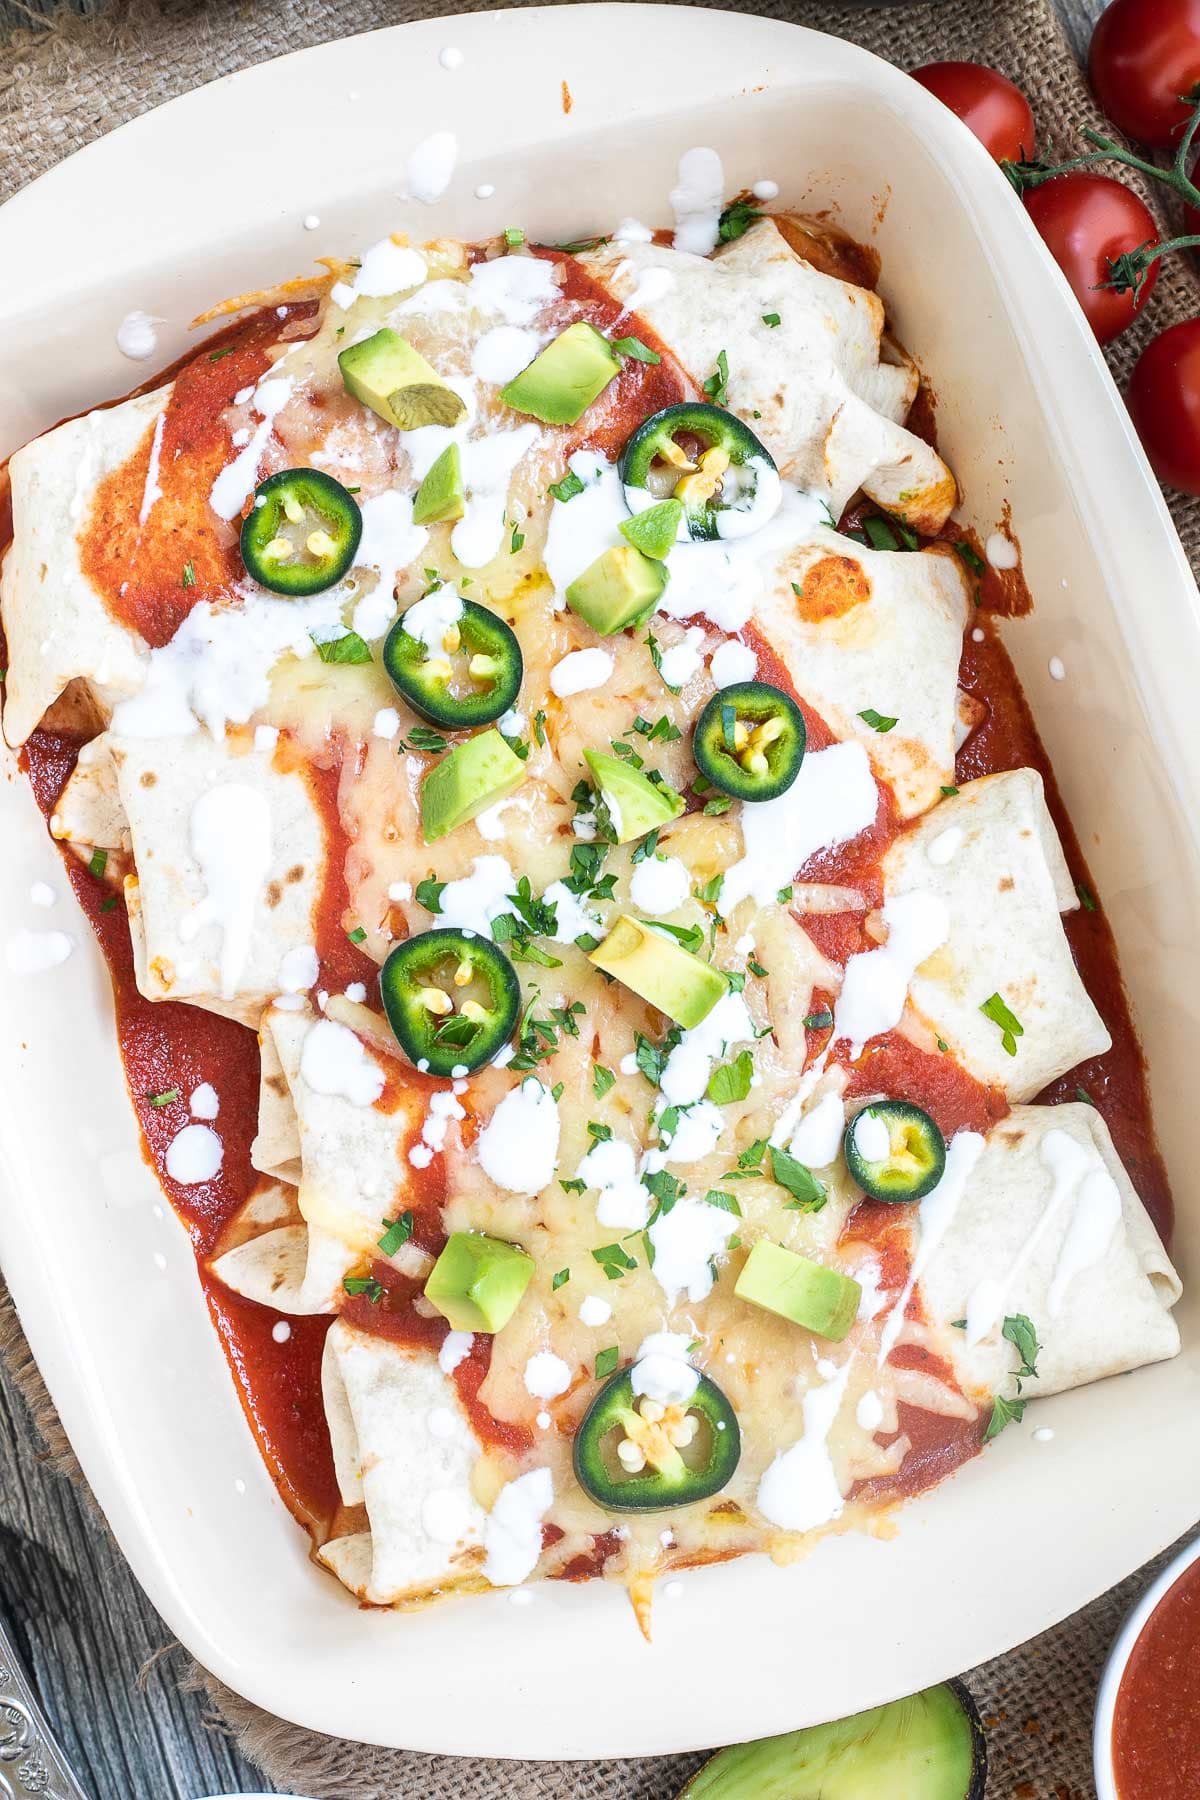 4 tortilla wraps topped with red sauce, melted cheese, sour cream, green chili peppers and fresh chopped herbs tucked closely together in a ceramic pan. Leftover filling ingredients are next to the pan in small bowls.